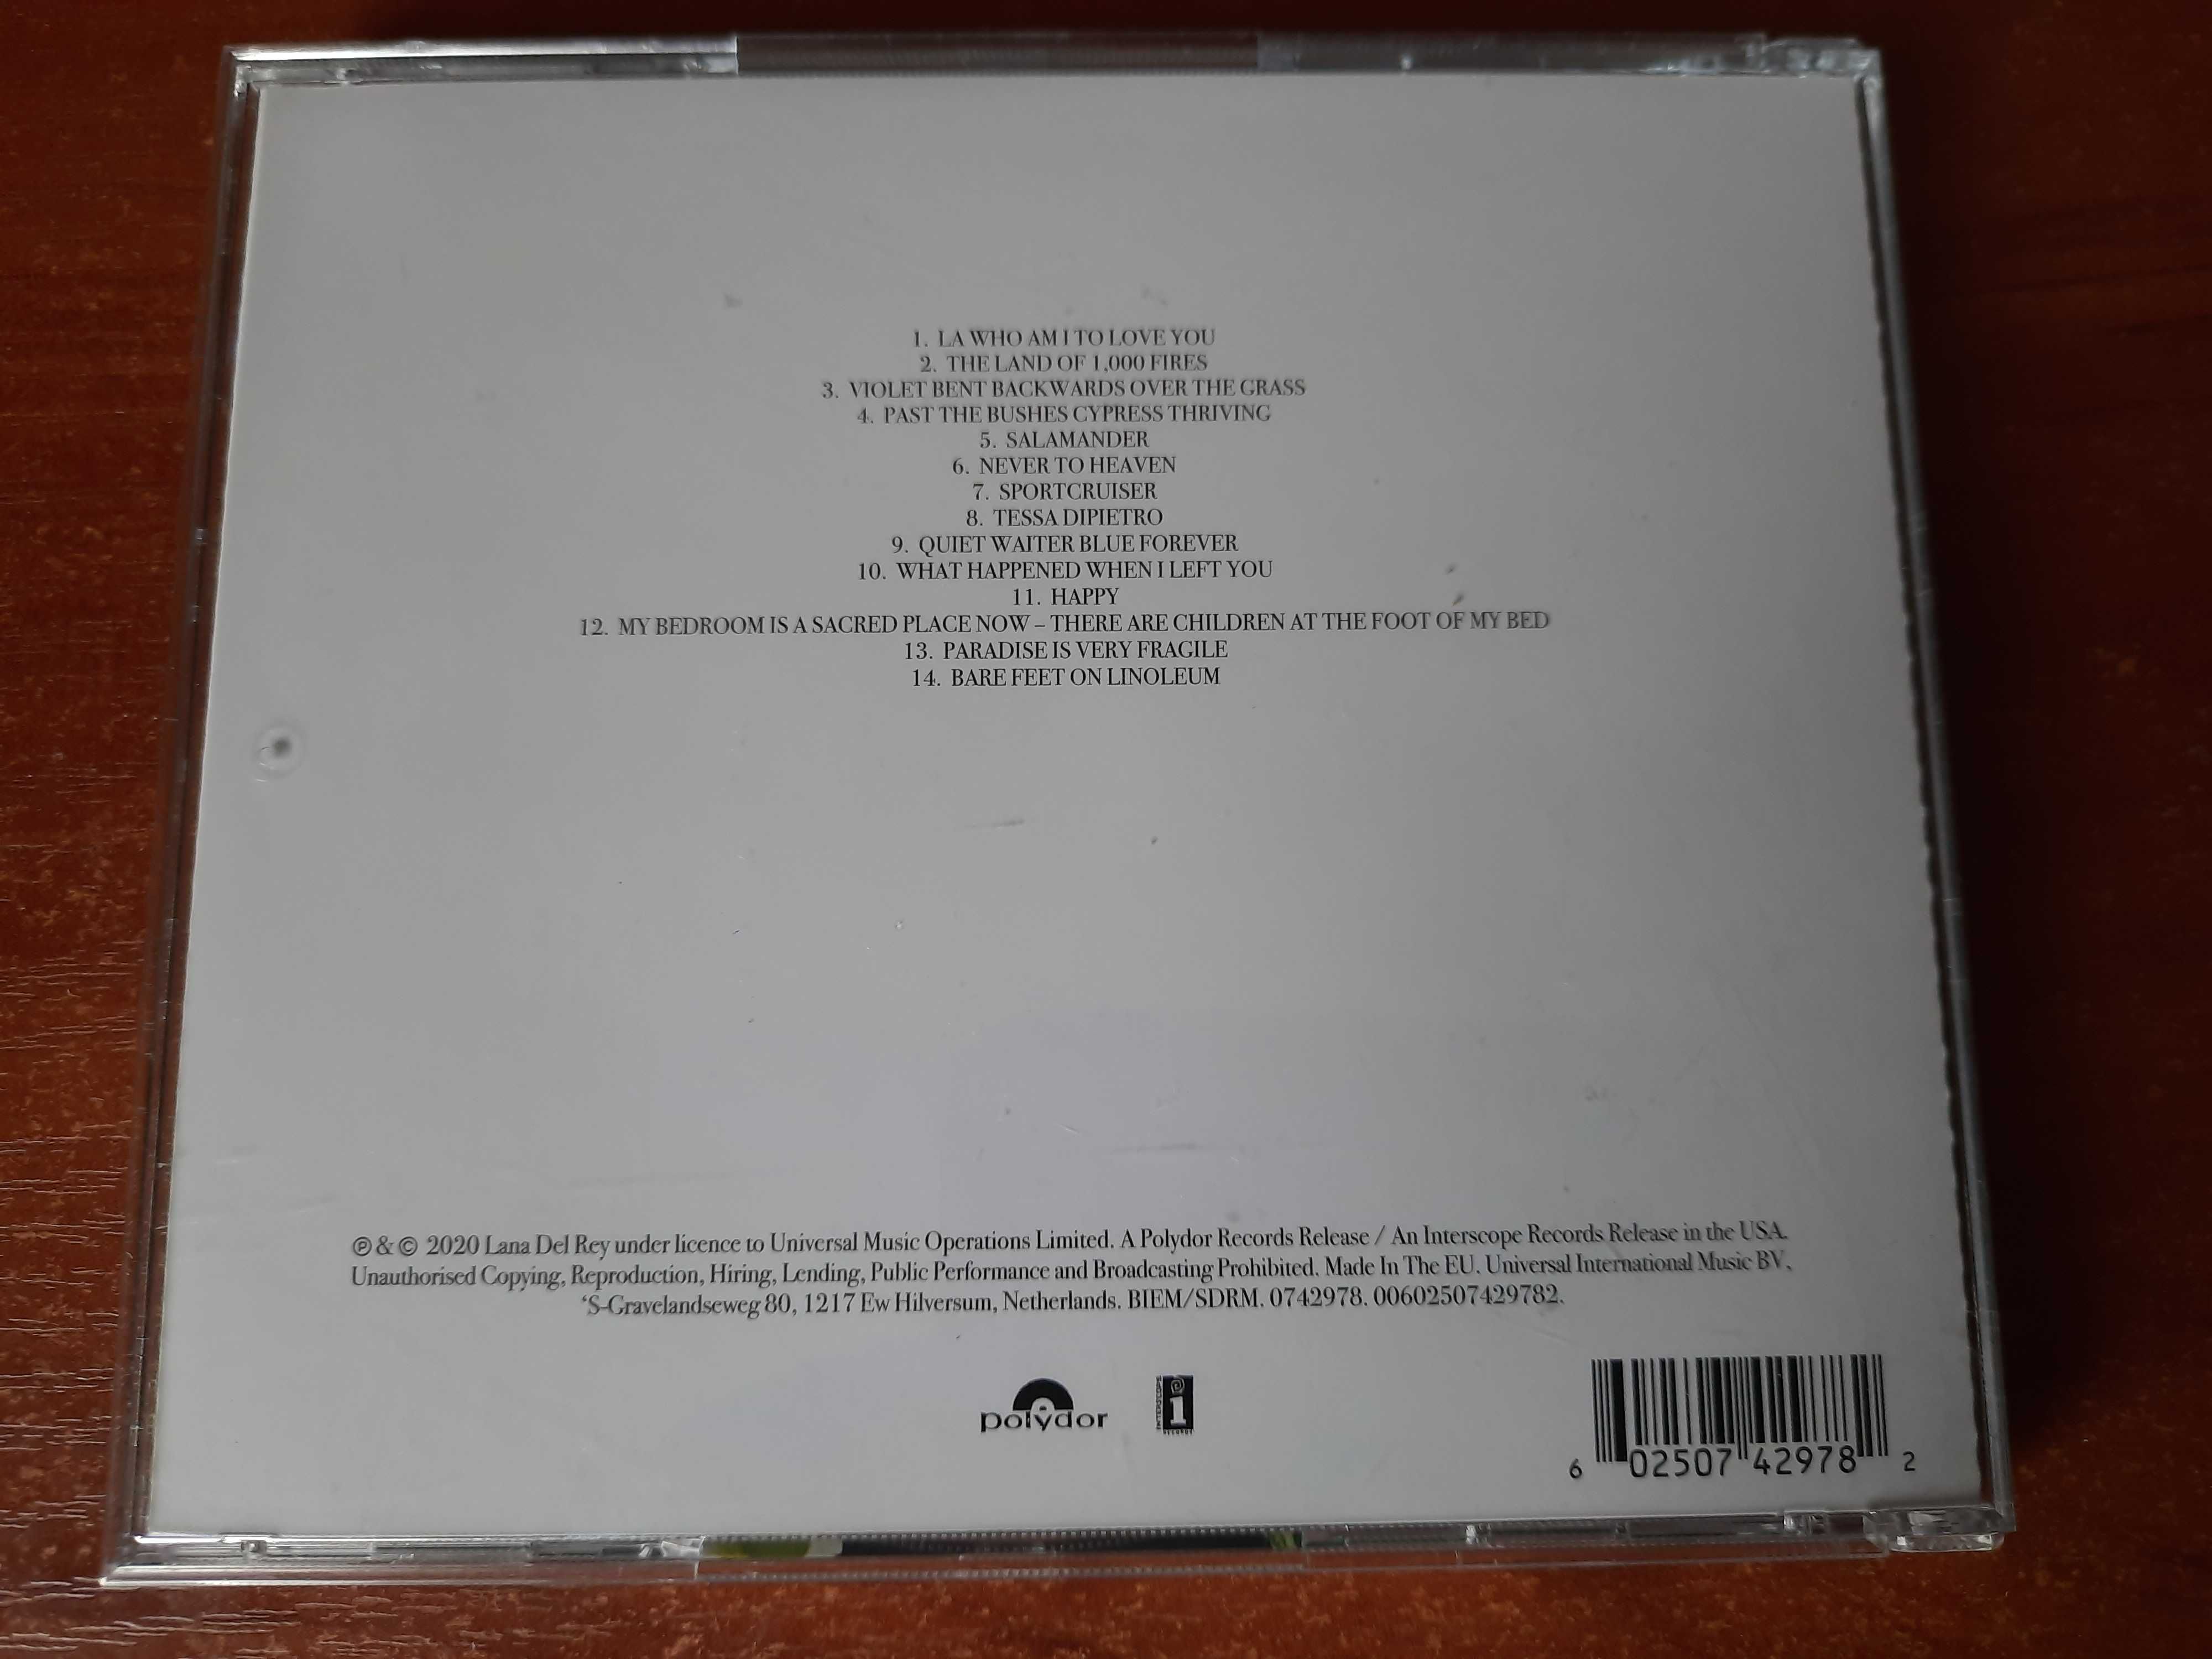 Audio CD Lana Del Rey - Read By The Author